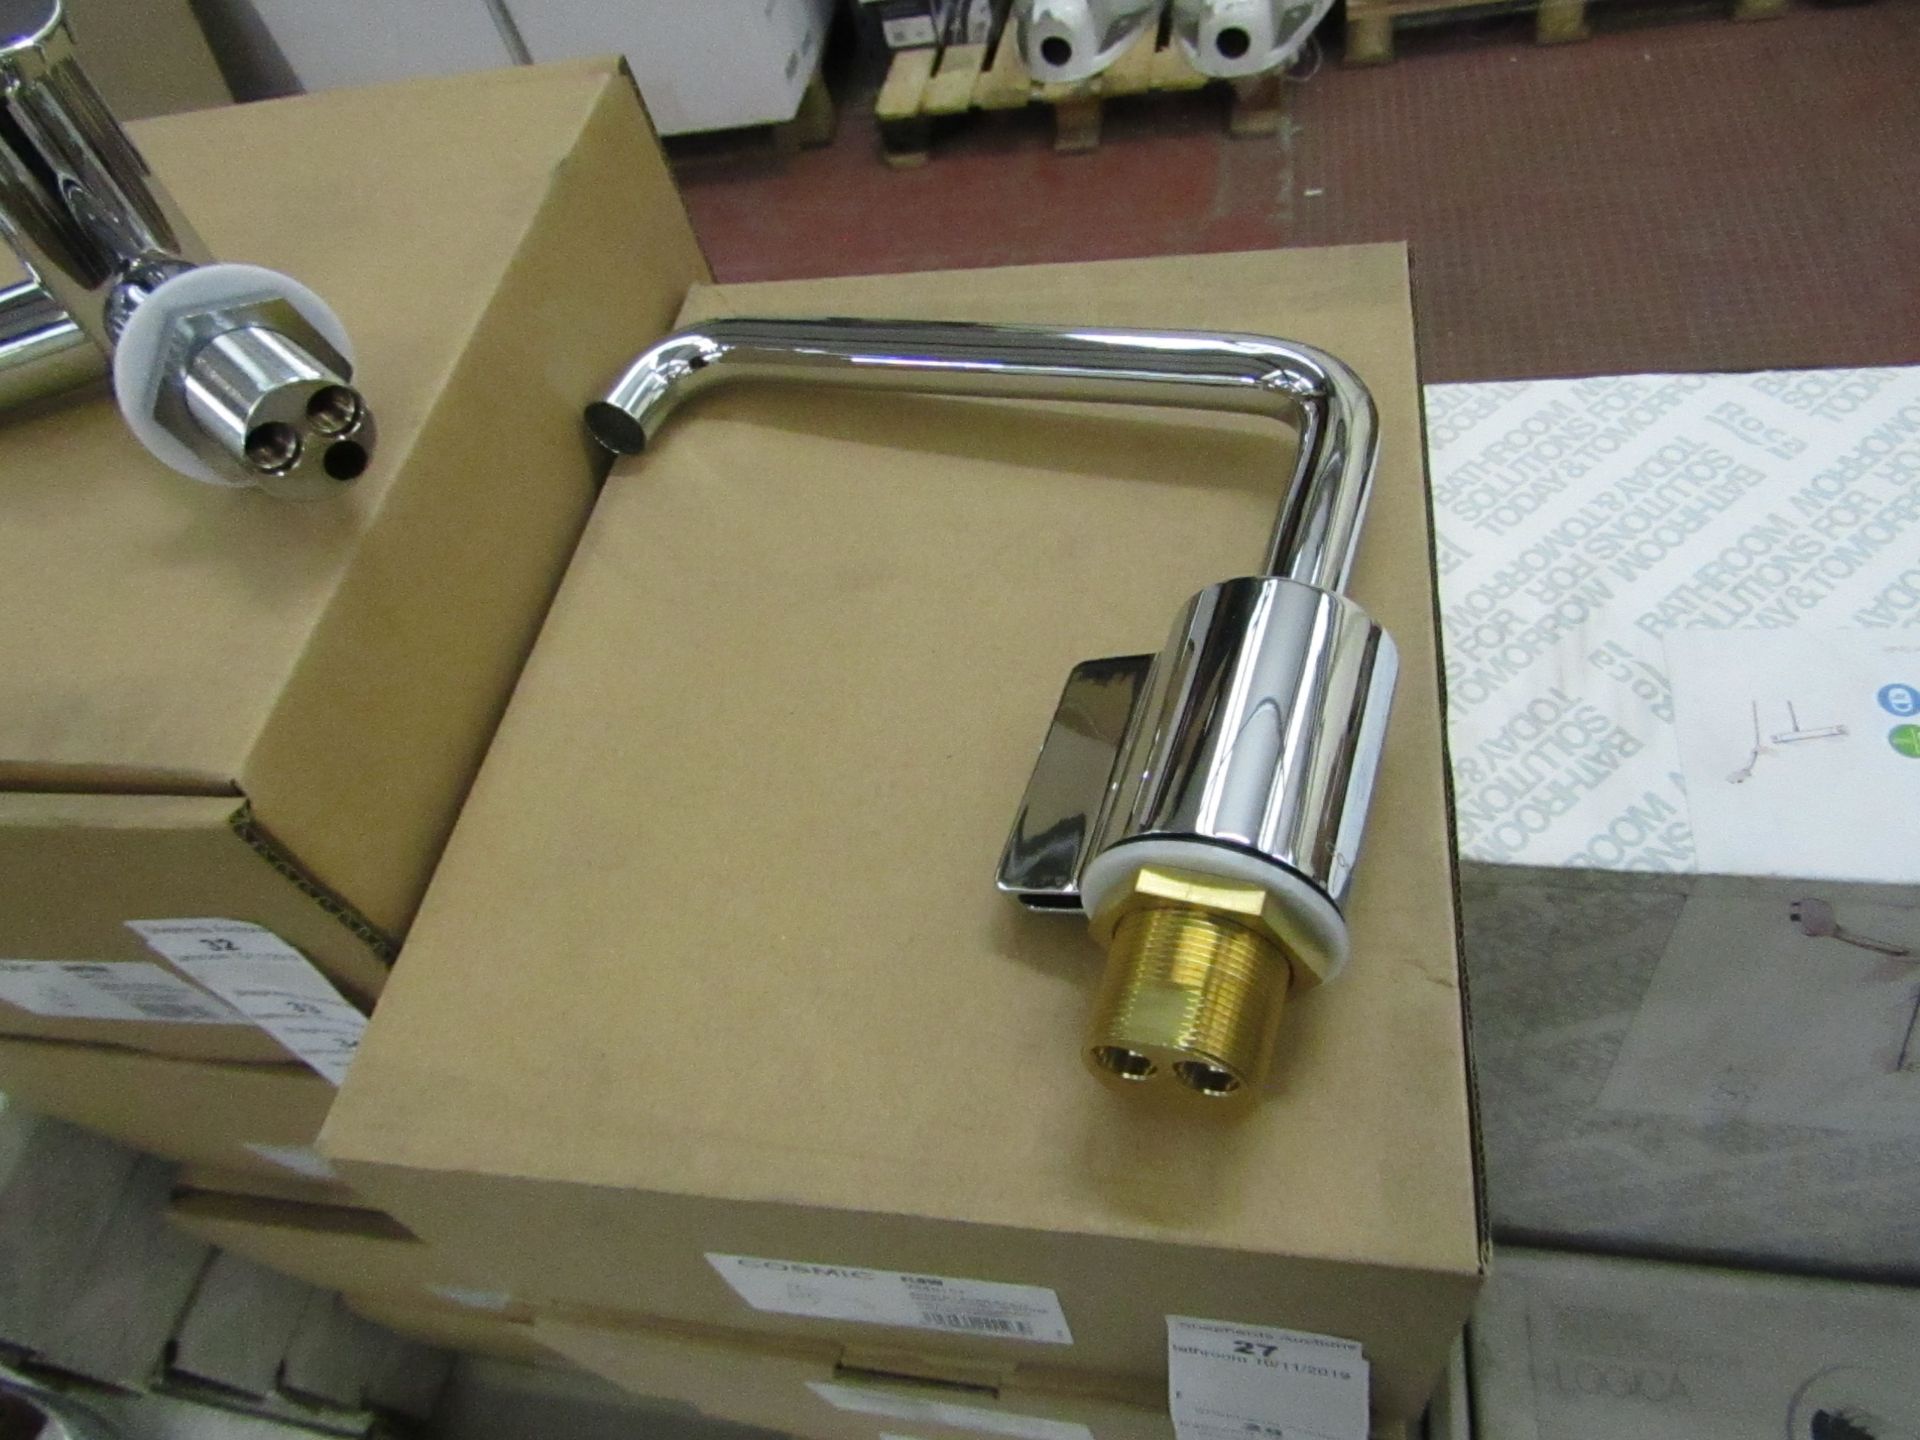 Cosmic Flow Single Lever Basin Mixer tap in chrome, unused nad boxed, RRP £300 - Image 2 of 2